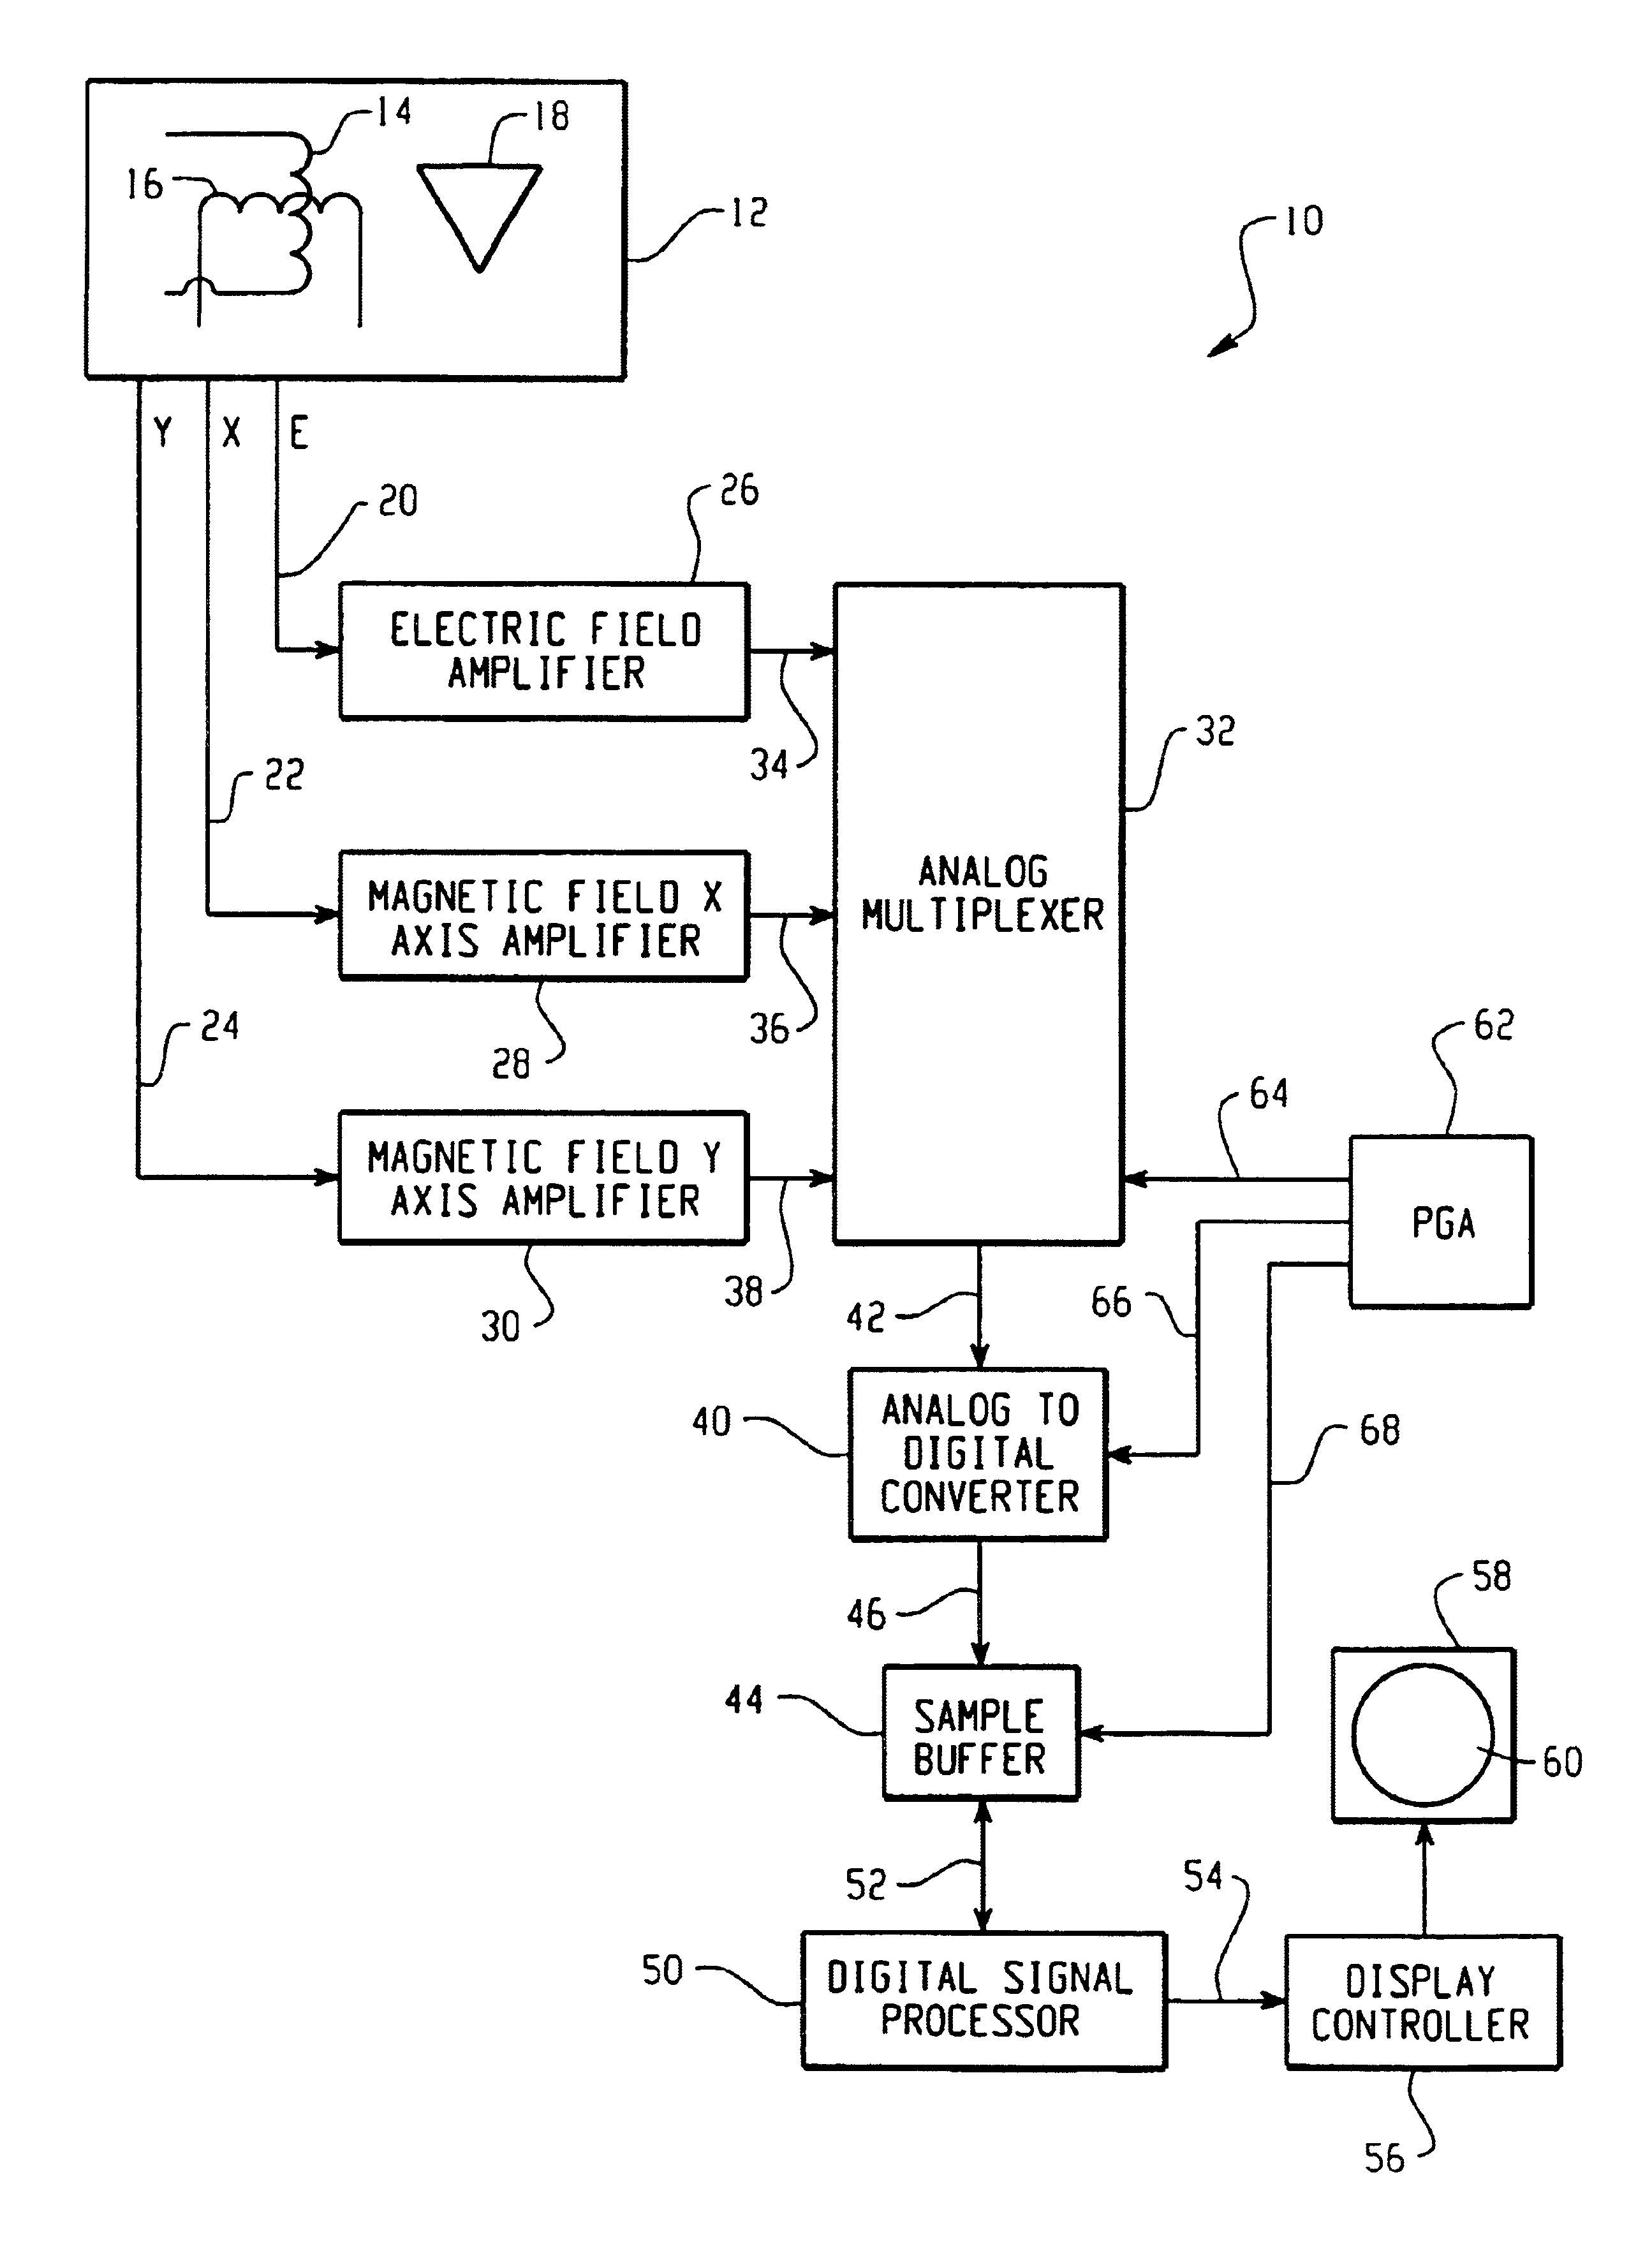 Passive clear air turbulence detection avionics system and method